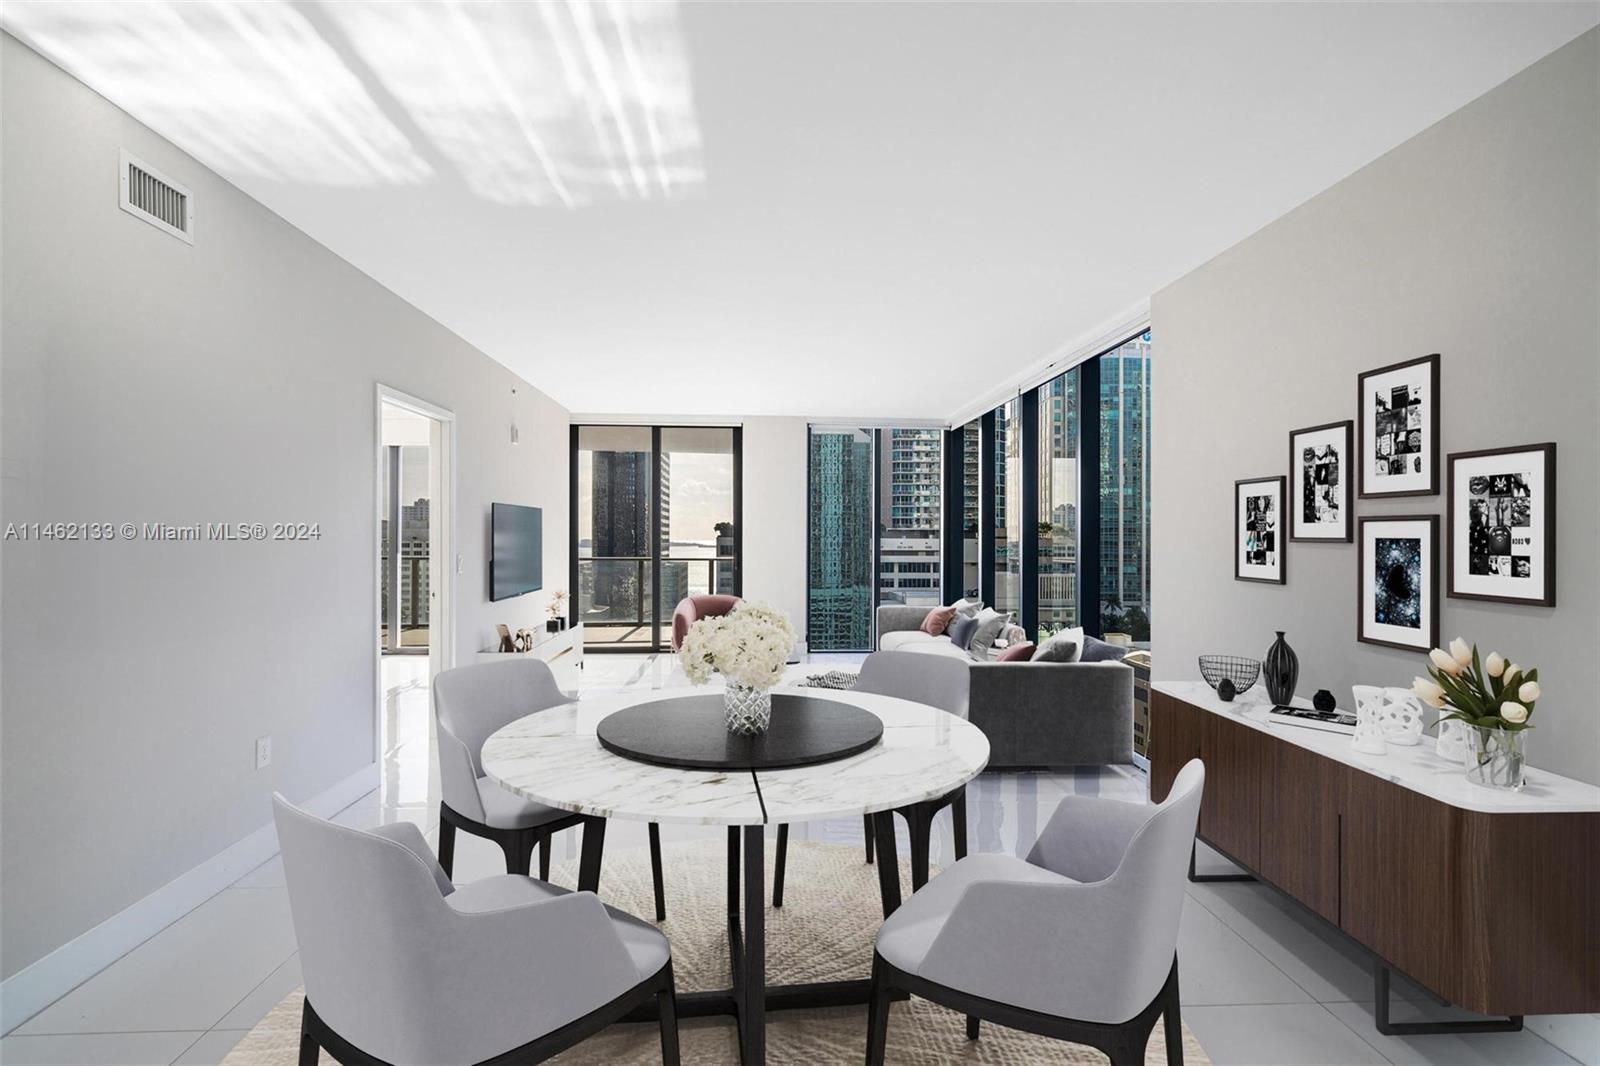 Desired corner unit with views of the Miami skyline and Biscayne Bay.  This spacious 3/3 + den which can be converted into a 4th bedroom, has floor to ceiling windows throughout.  A private elevator takes you directly to your unit.  This luxury building has 2 floors of amenities including a rooftop pool, outdoor theater, squash court, indoor basketball court, a spa featuring a co-ed hammam, a fitness center with a double-height ceiling, an outdoor track, an arcade with a golf simulator, and a host of other fantastic features!  Located in central Brickell you can walk to everything.  2 garage spaces included.